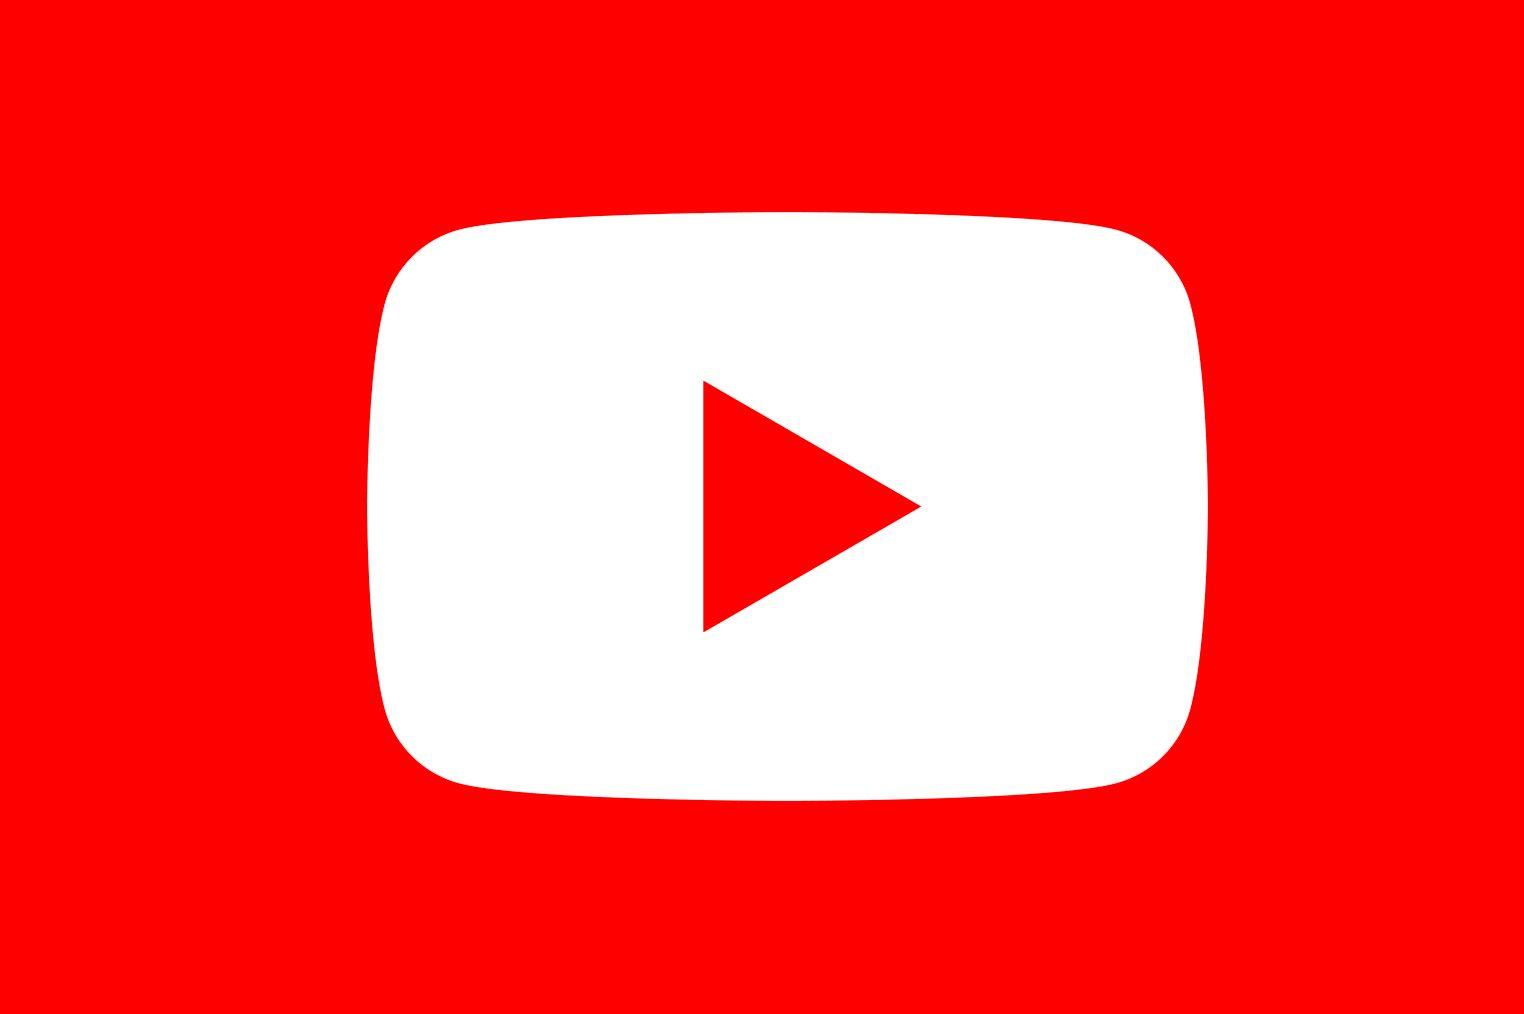 Red and White Triangle in Logo - YouTube Logo, YouTube Symbol, Meaning, History and Evolution